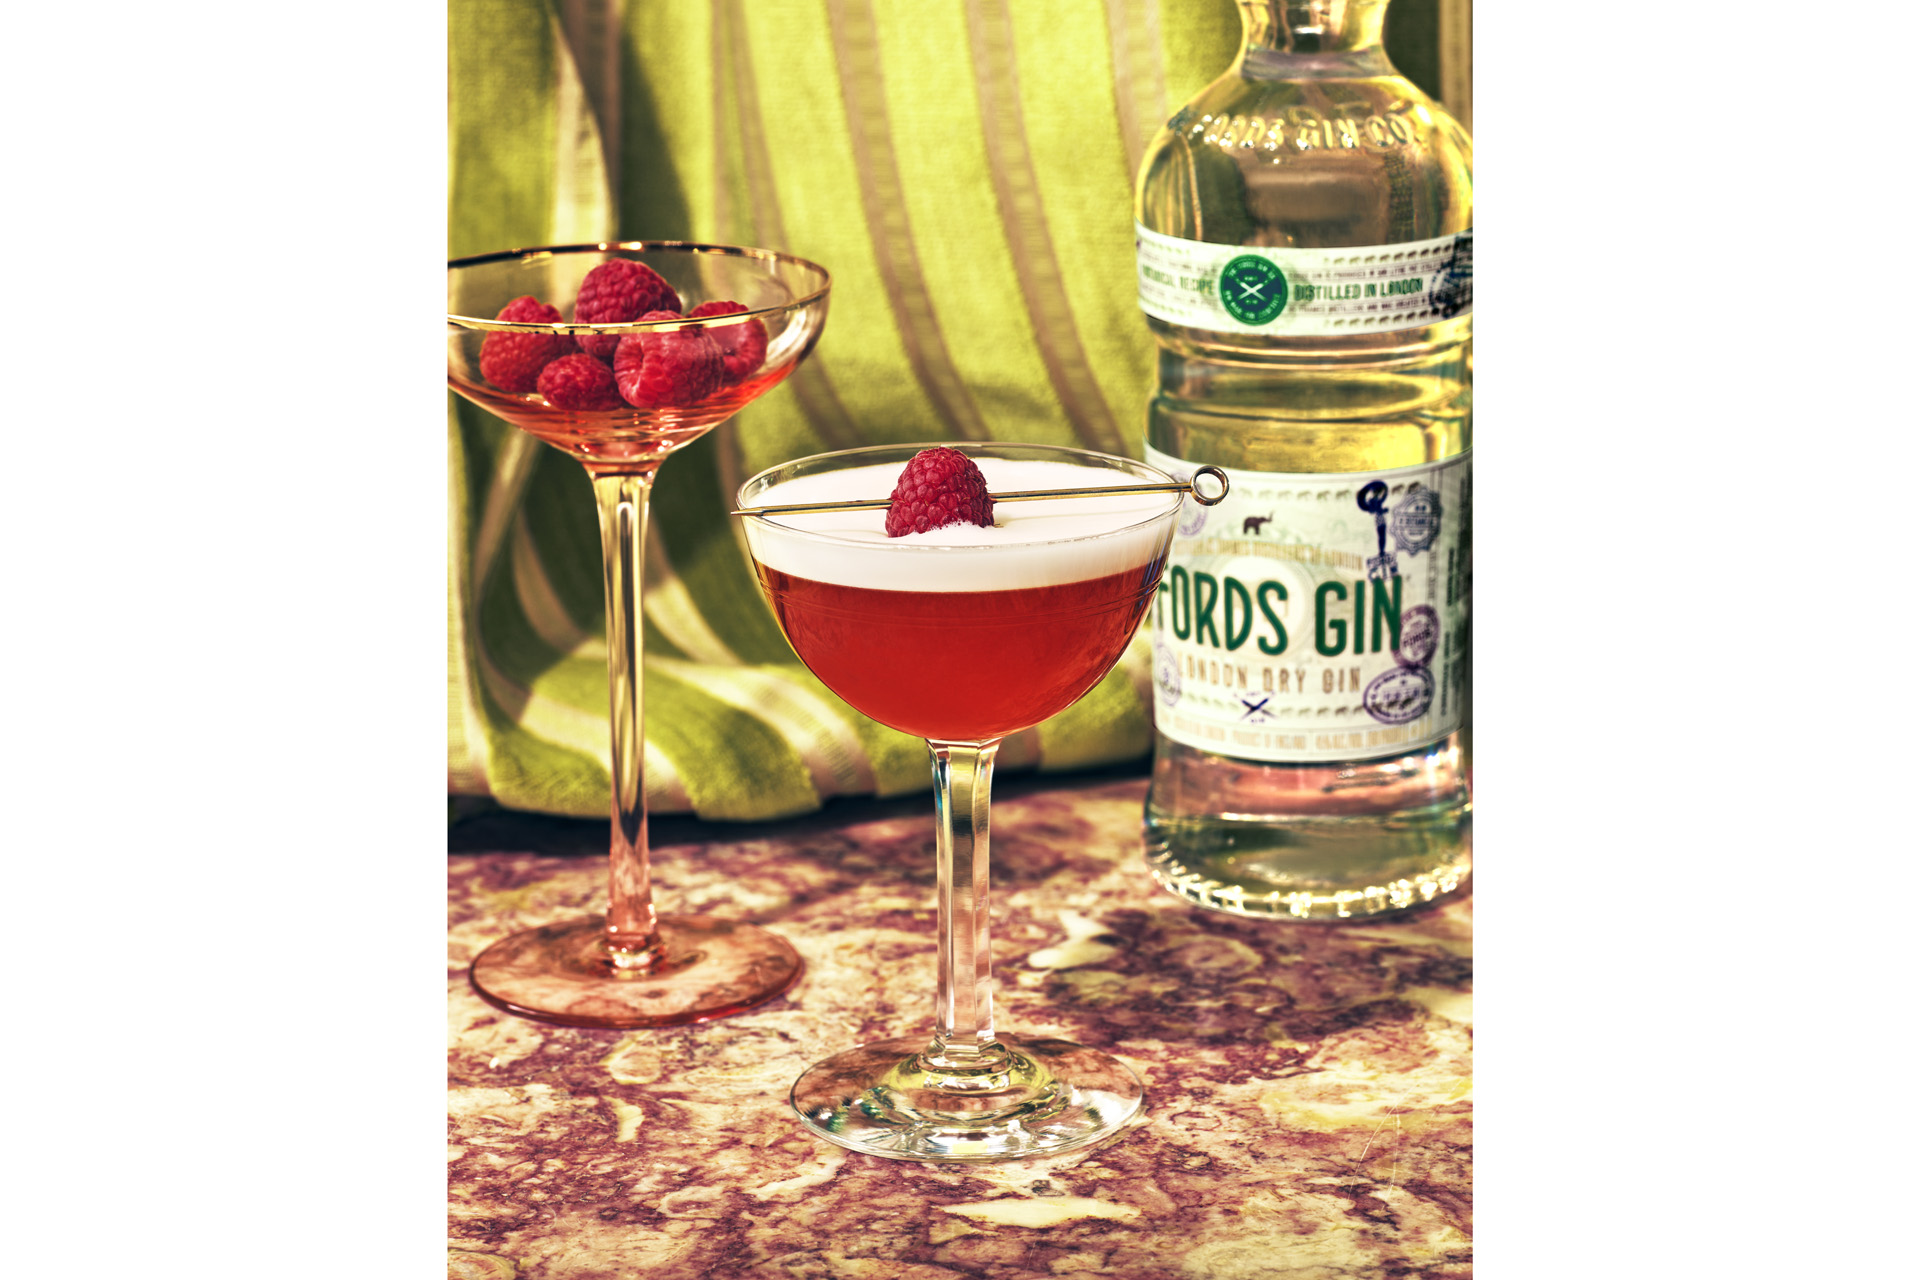 a French 75 cocktail with a bottle of Fords Gin behind